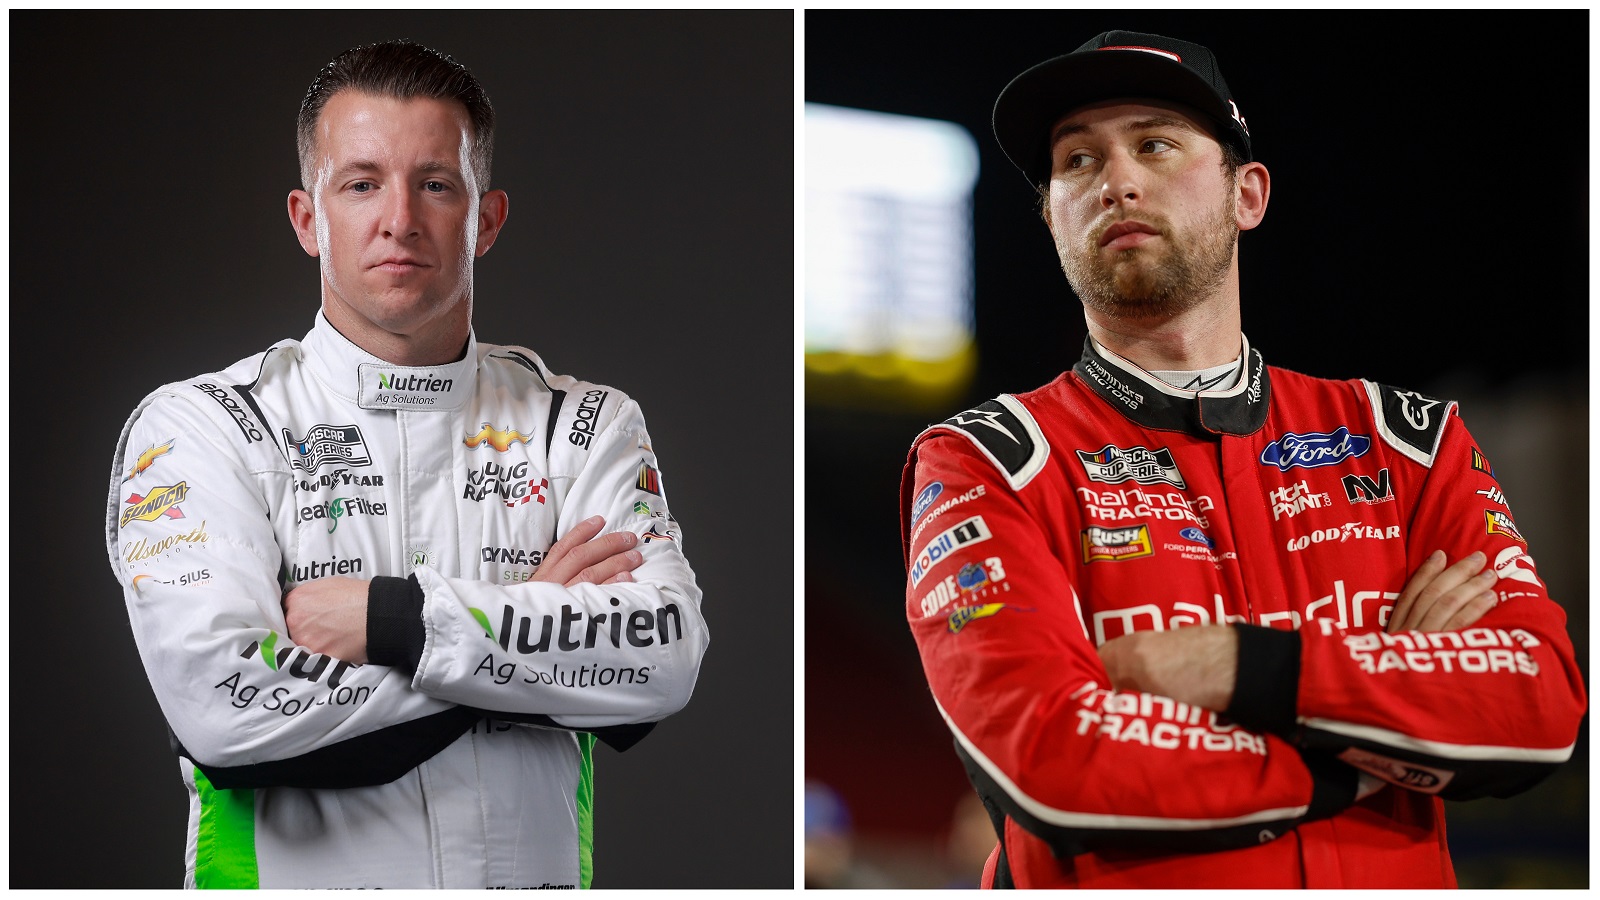 NASCAR Cup Series drivers AJ Allmendinger and Chase Briscoe. | Getty Images